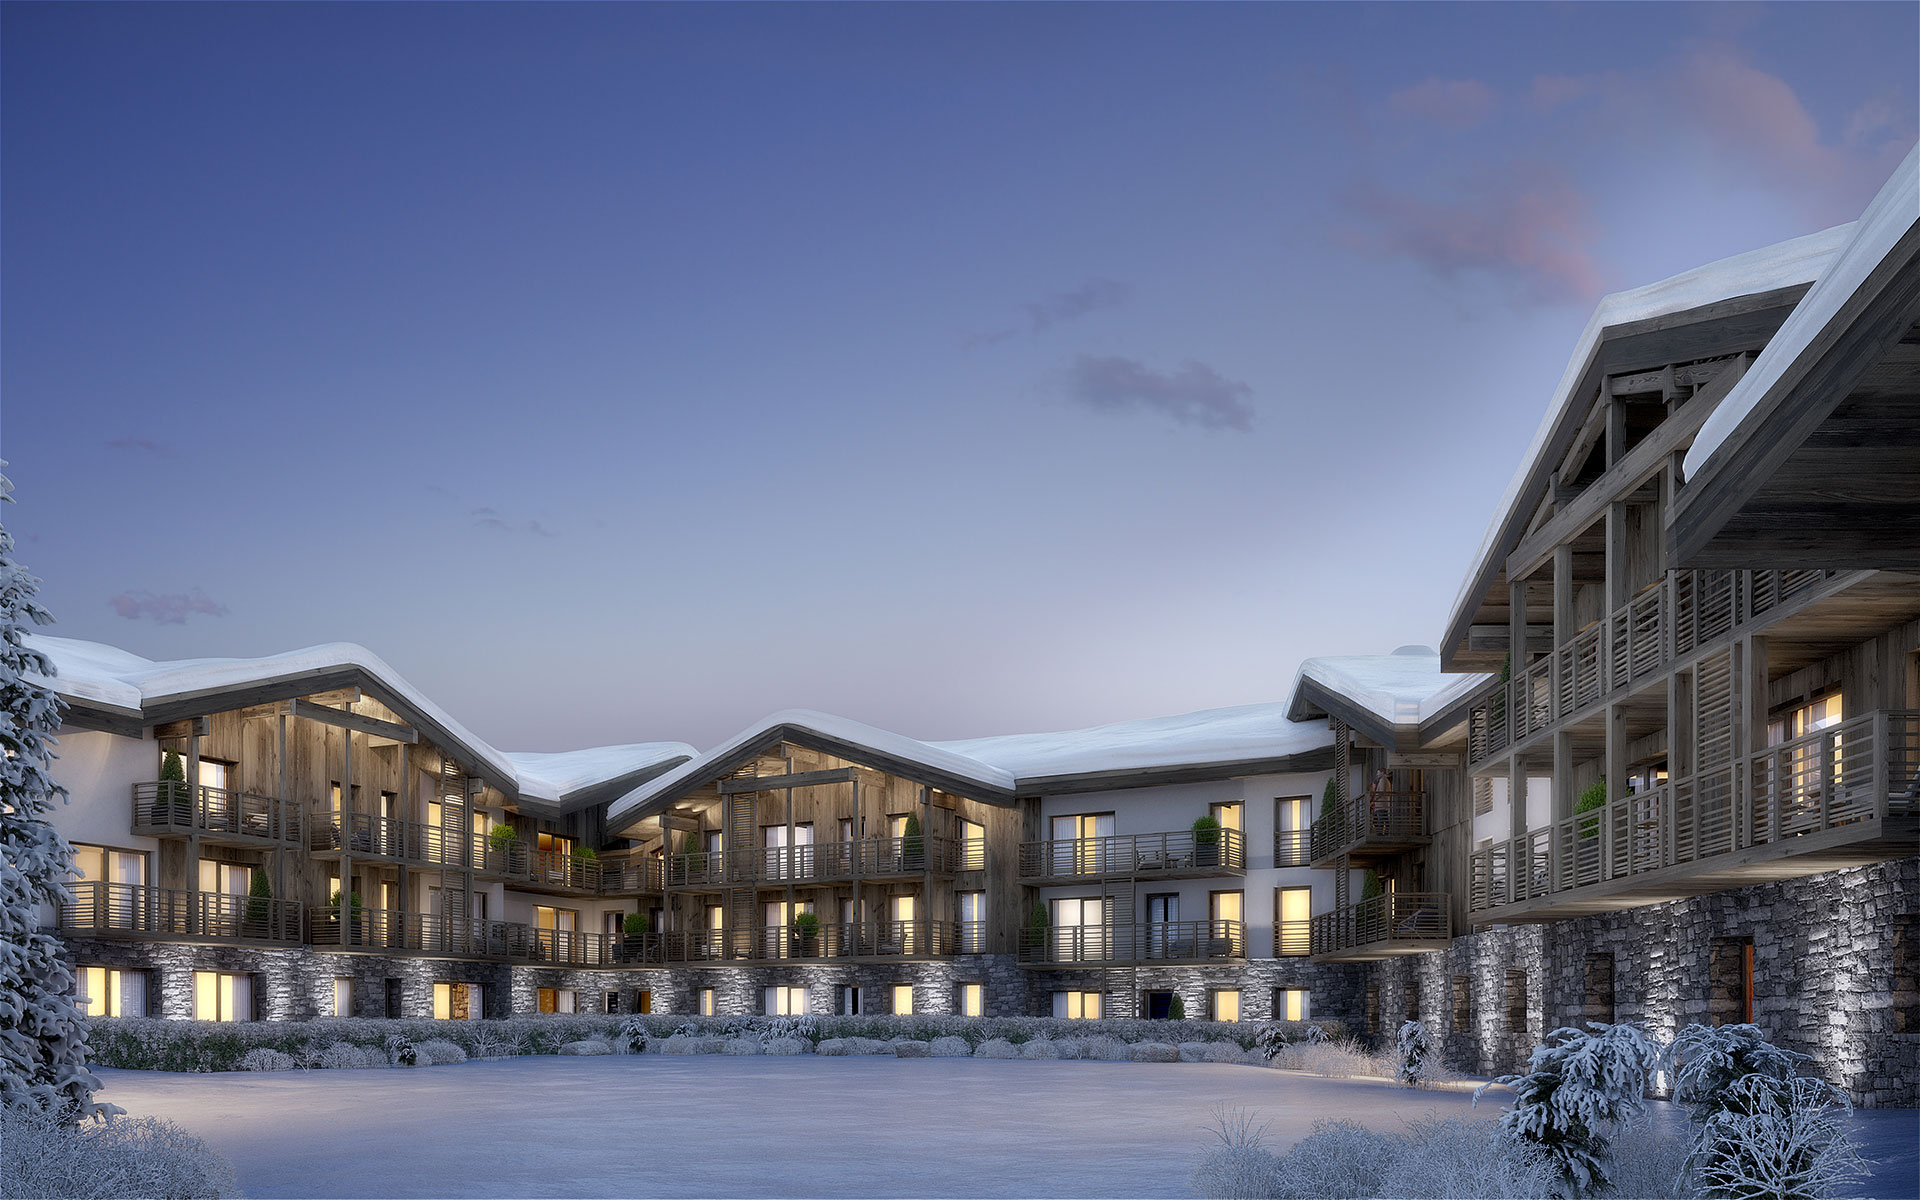 3D Exterior visualization of a resort chalet village in the Alps